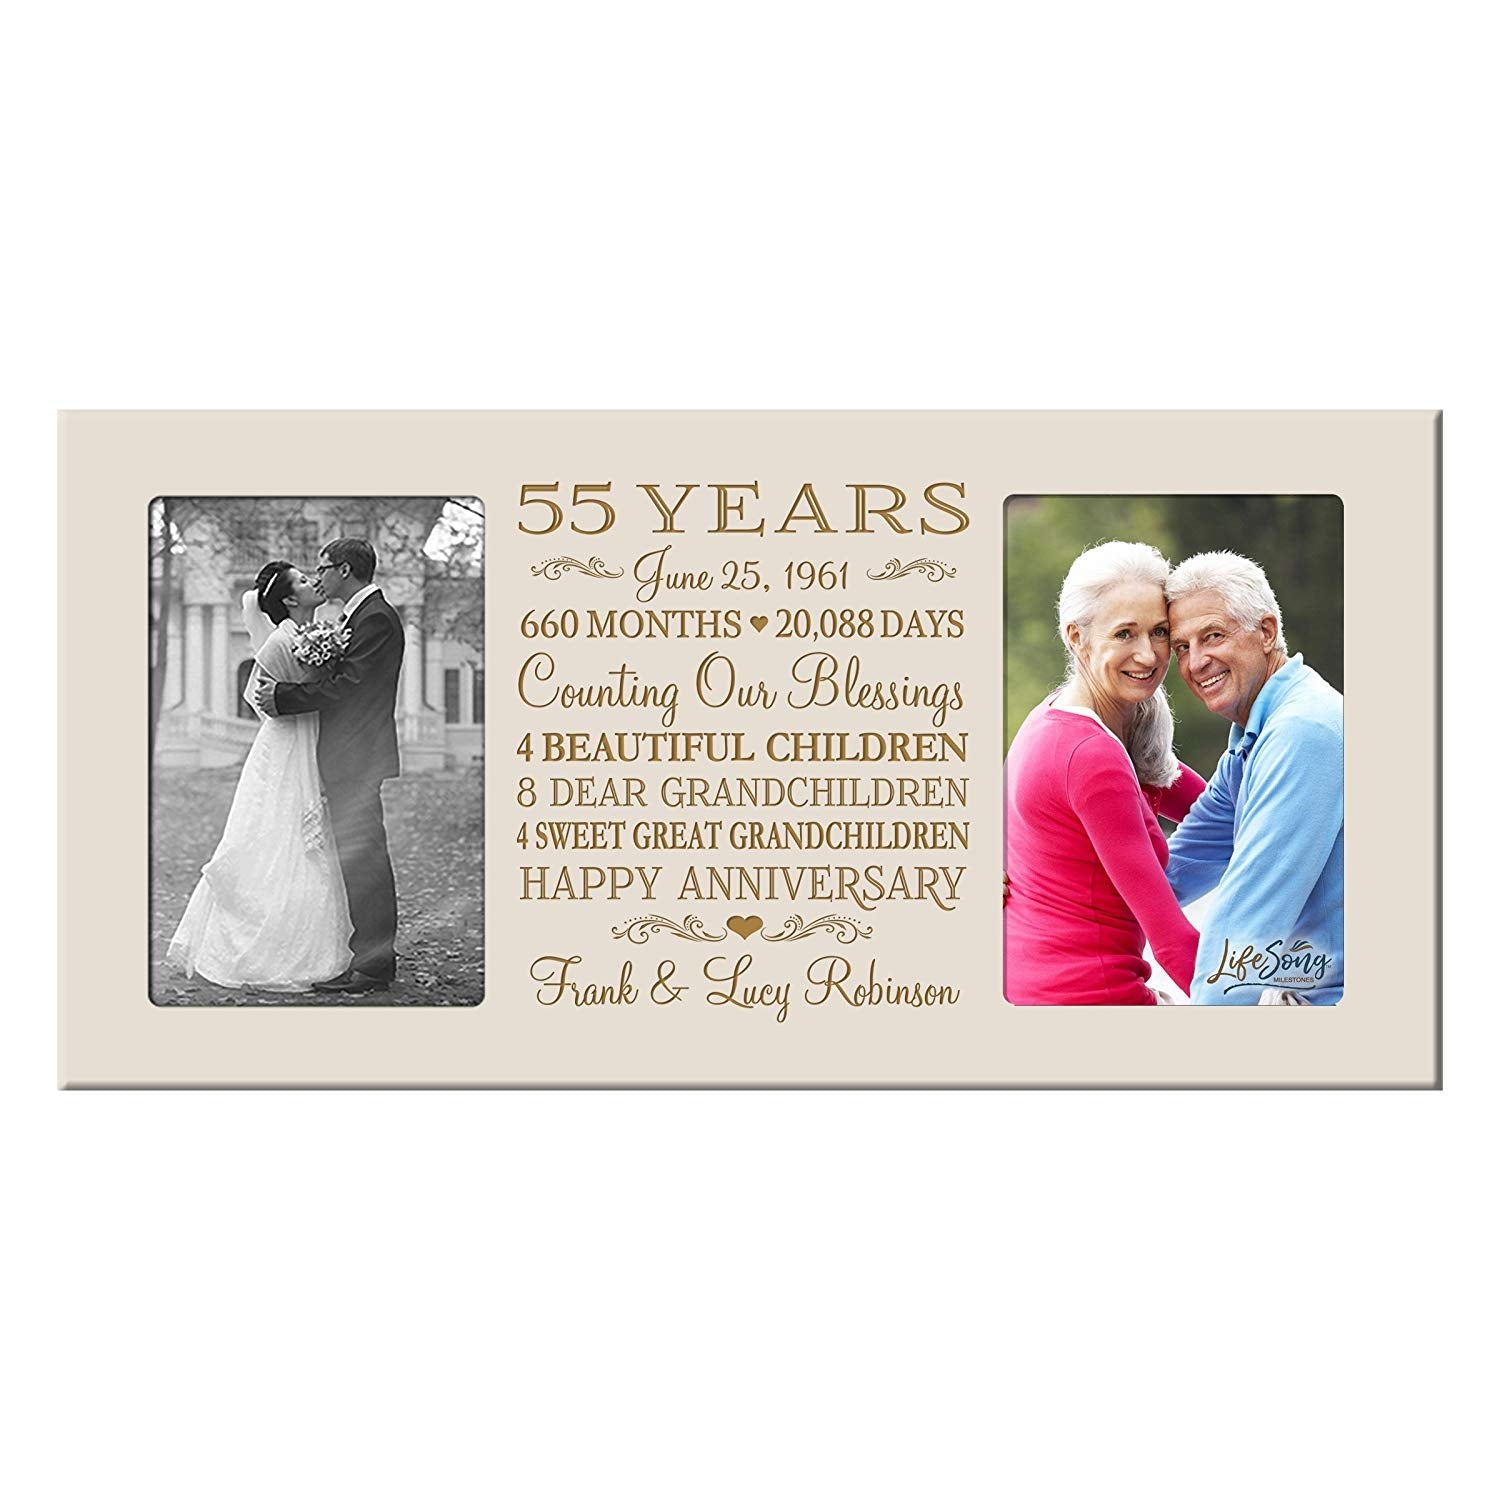 Lifesong Milestones Personalized Picture Frame for Couples 55th Wedding Anniversary Decorations